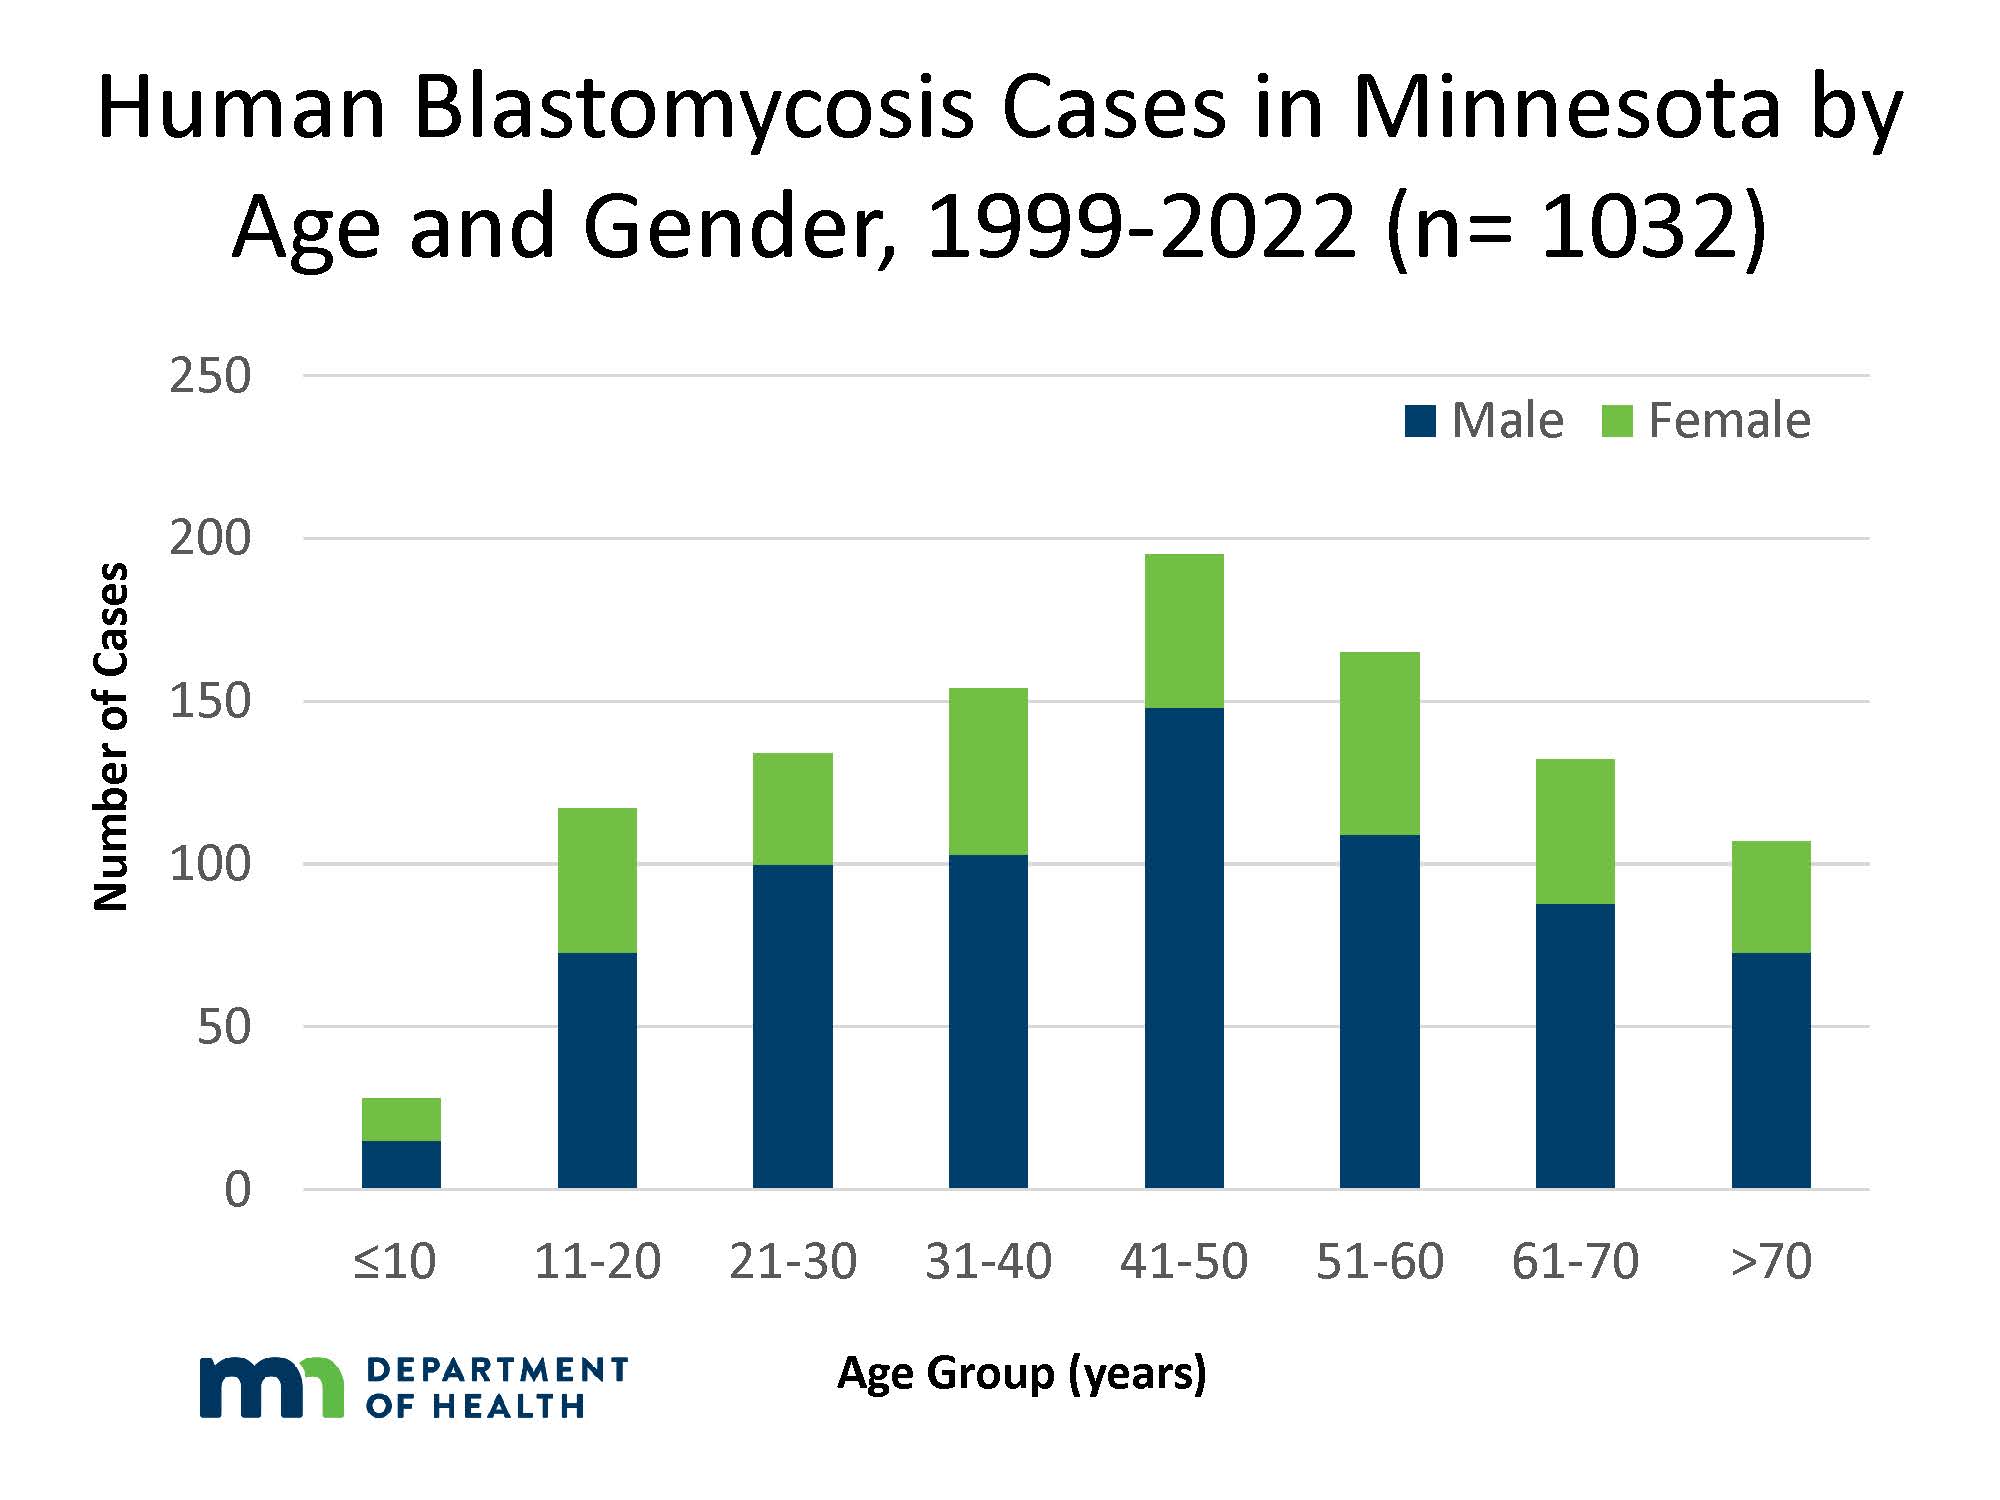 Human blastomycosis cases in MN by age and gender